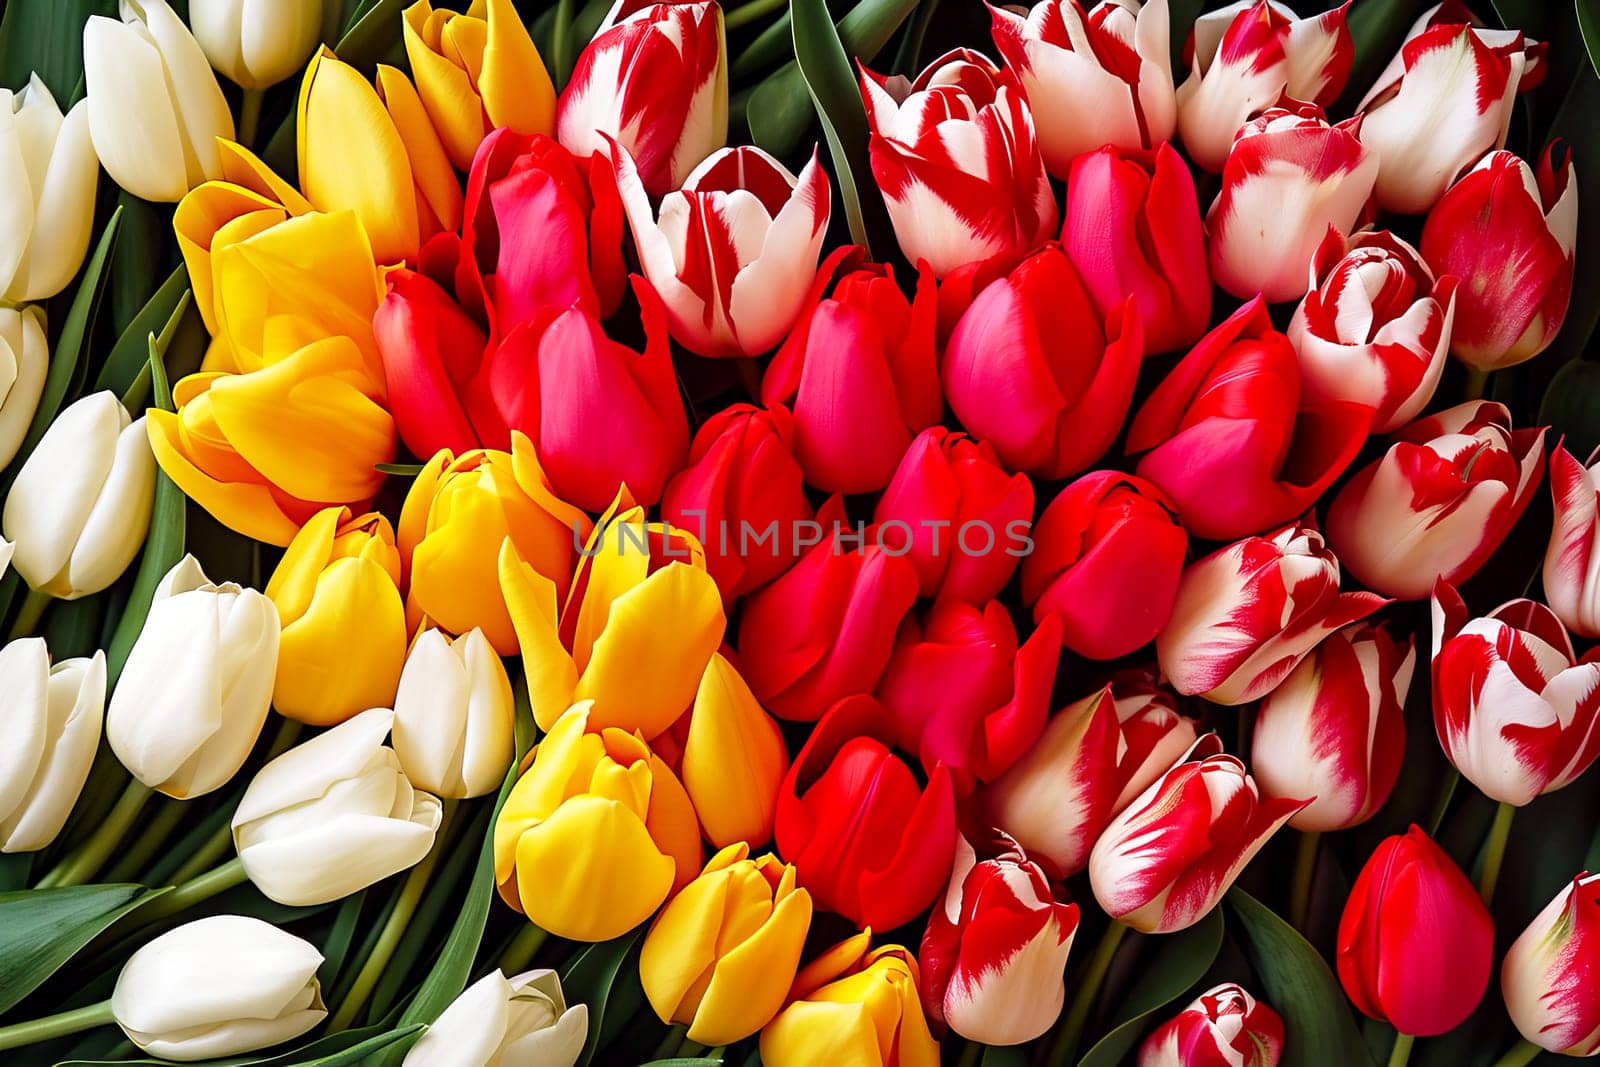 Mother's Day, Women's Day, heart shape made of small red, white and yellow tulips.